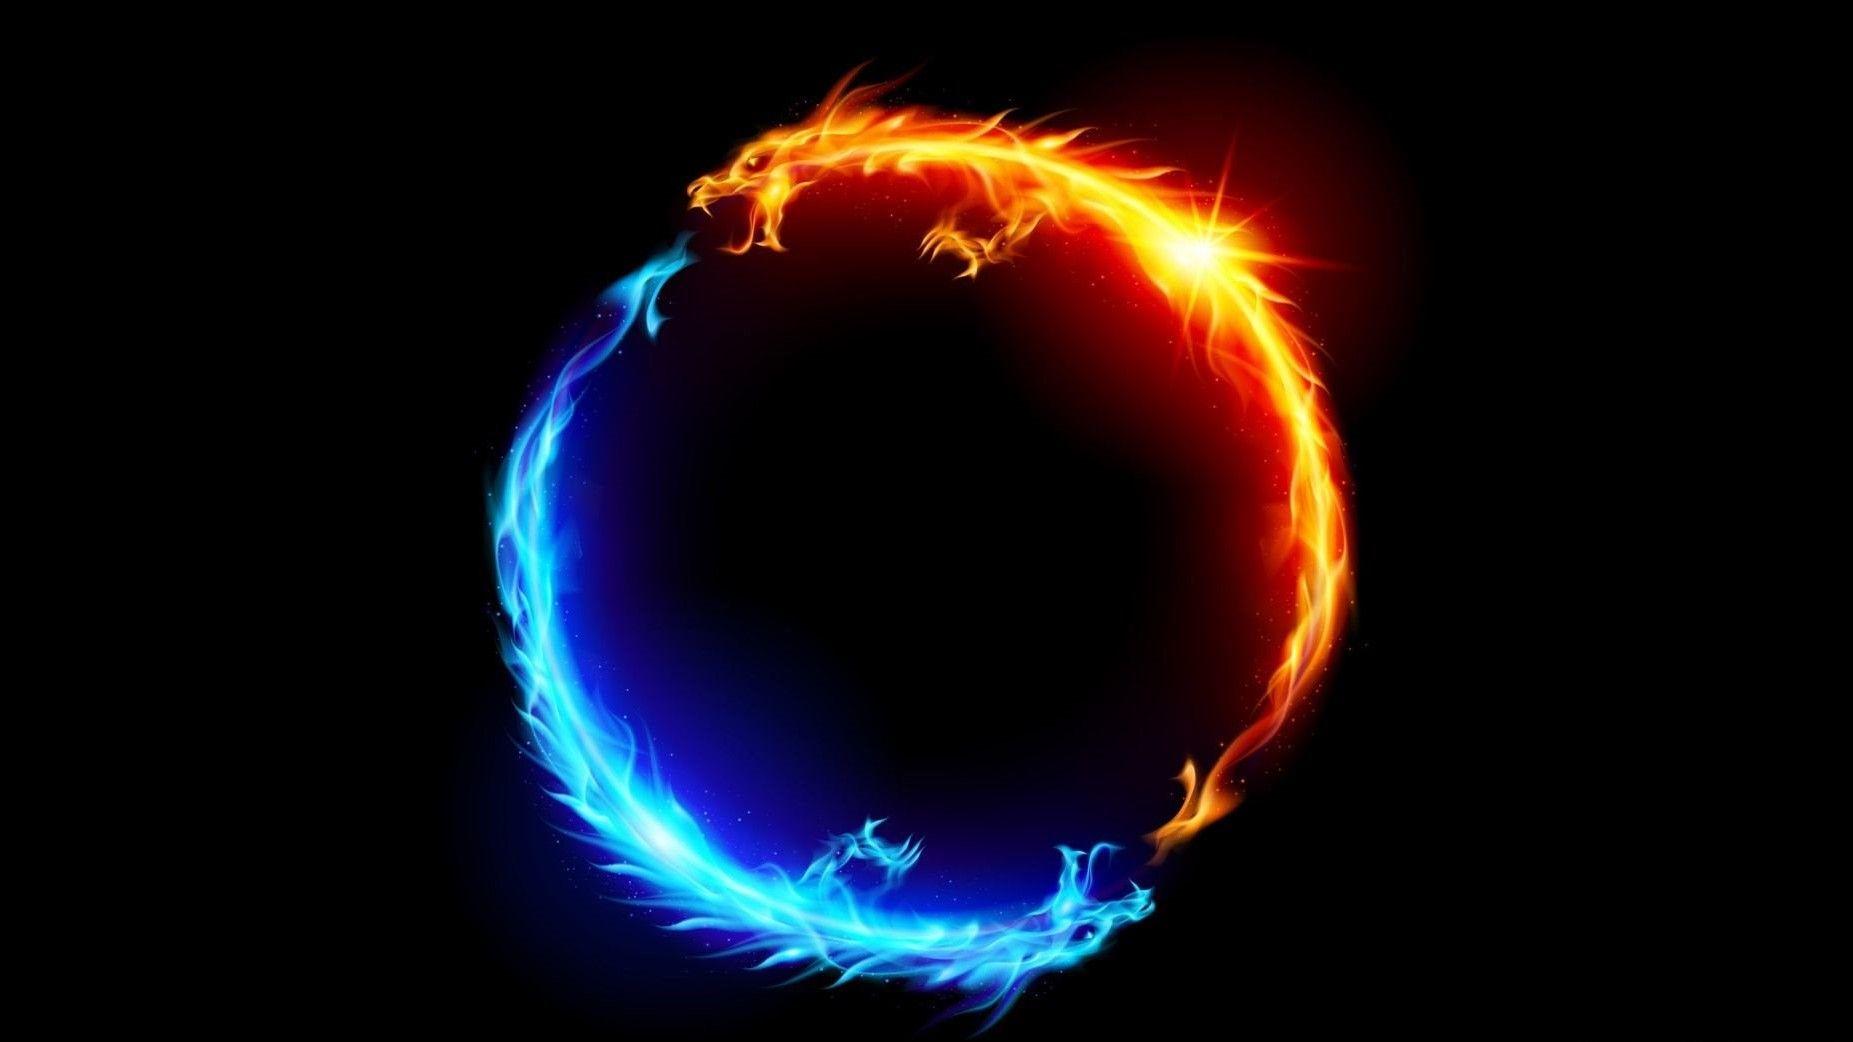 Fire and Ice HD Wallpaper 1080p Wide Background Downloads